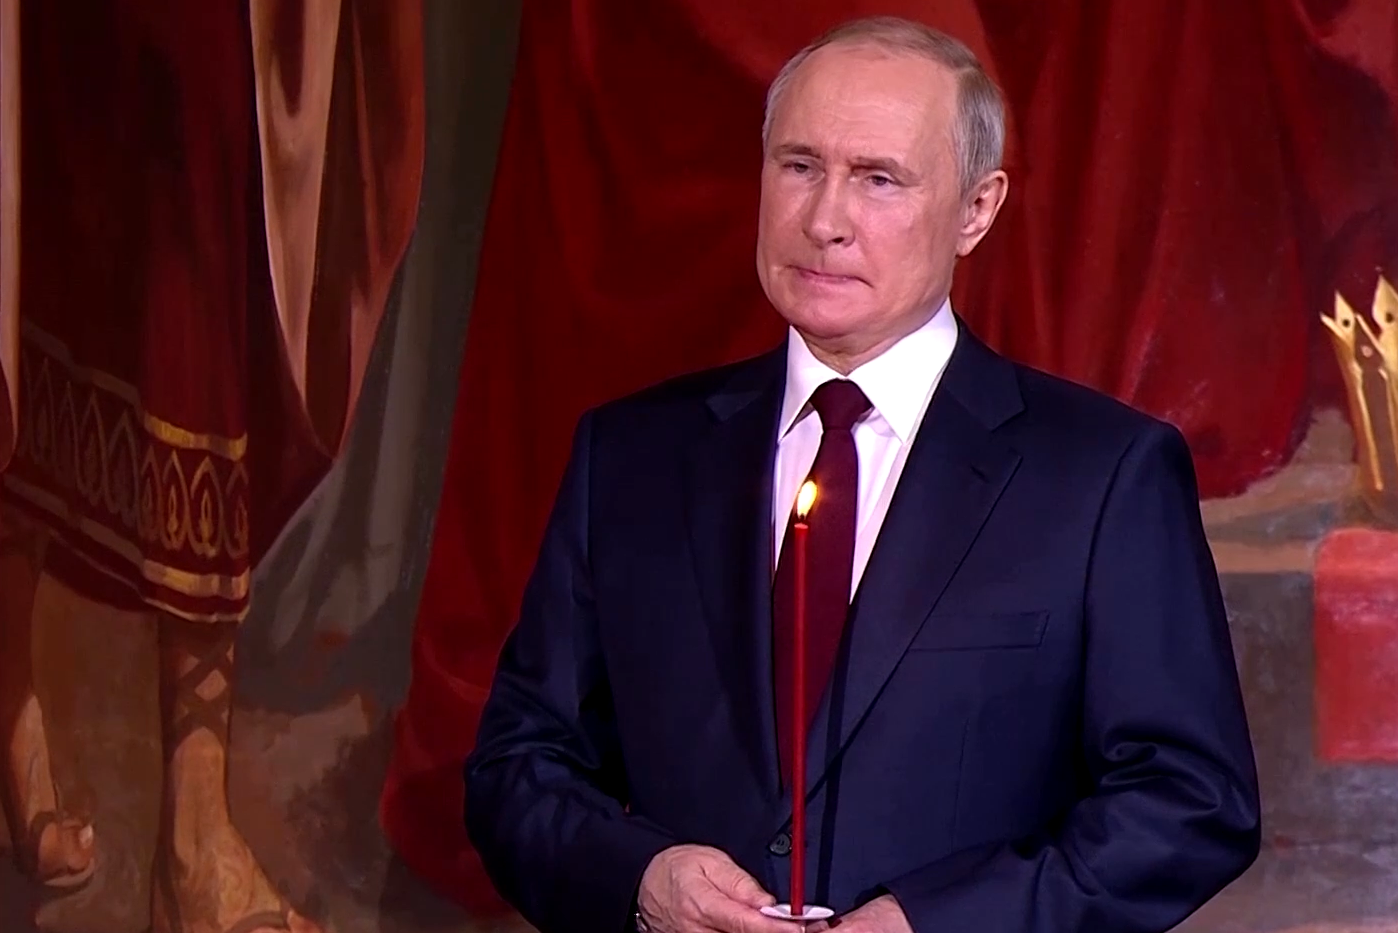 Putin’s ‘nervous’ behavior during Easter Mass raises further questions about his health